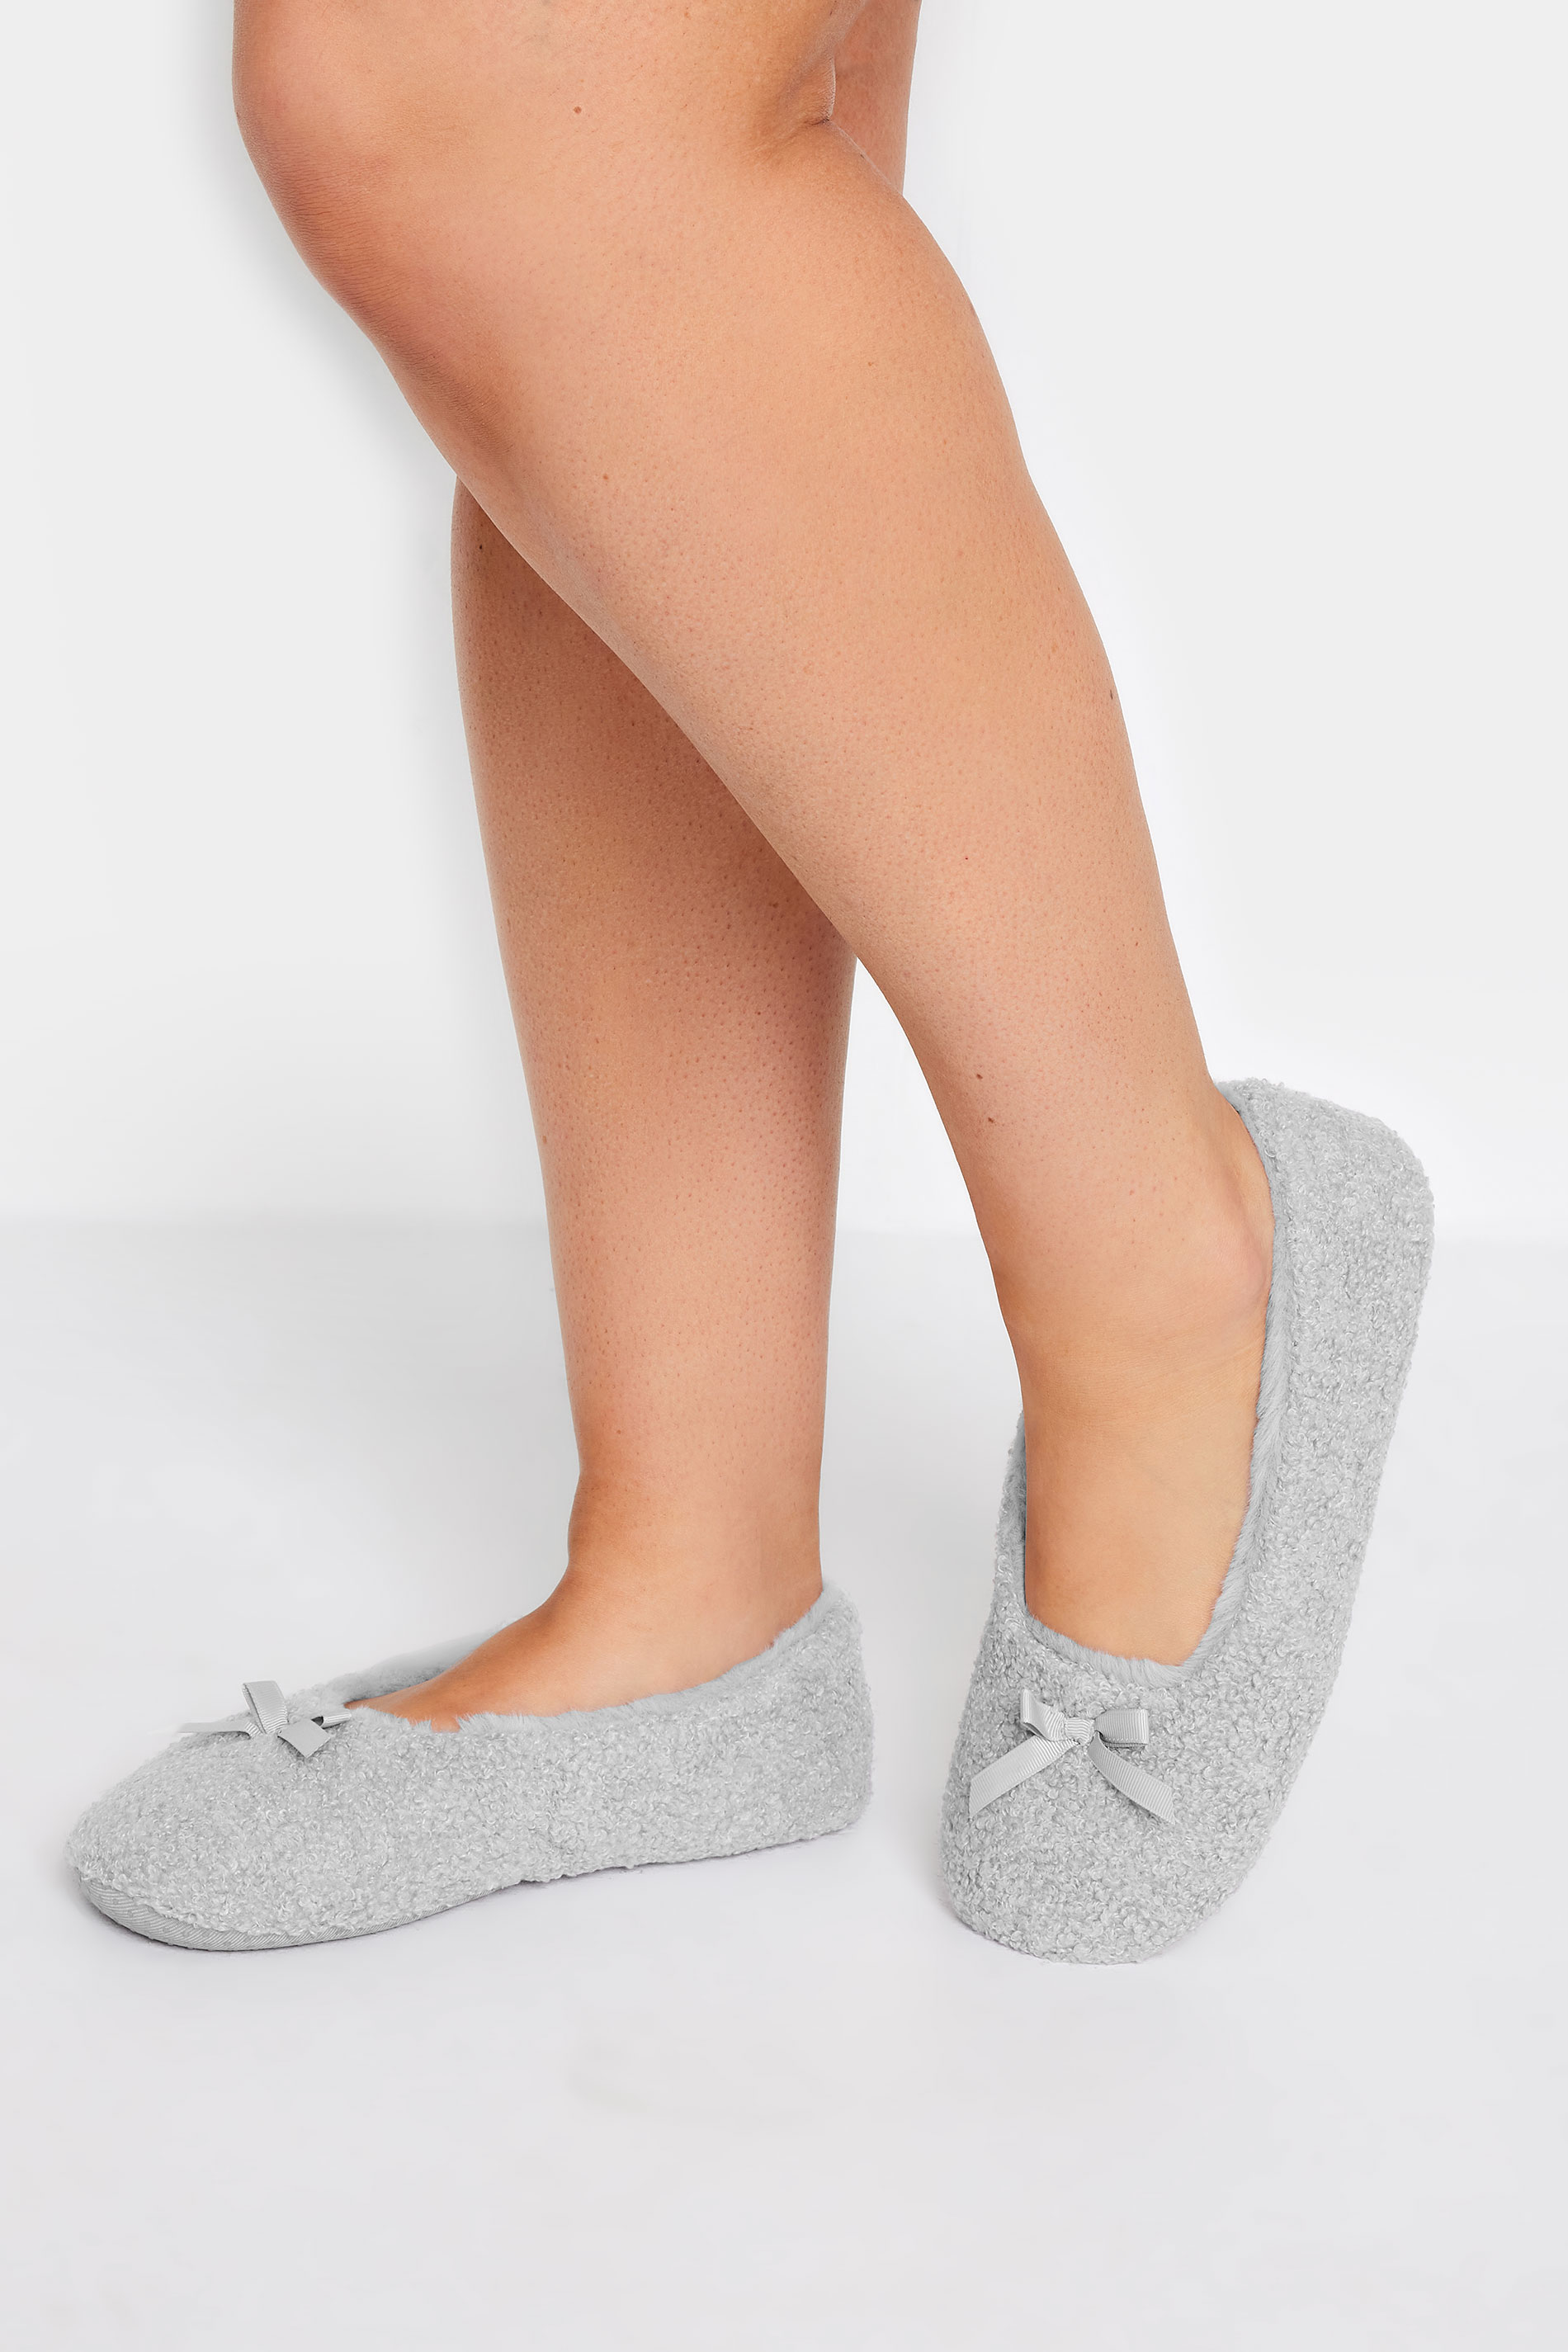 Grey Teddy Ballet Slippers In Wide E Fit | Yours Clothing 1